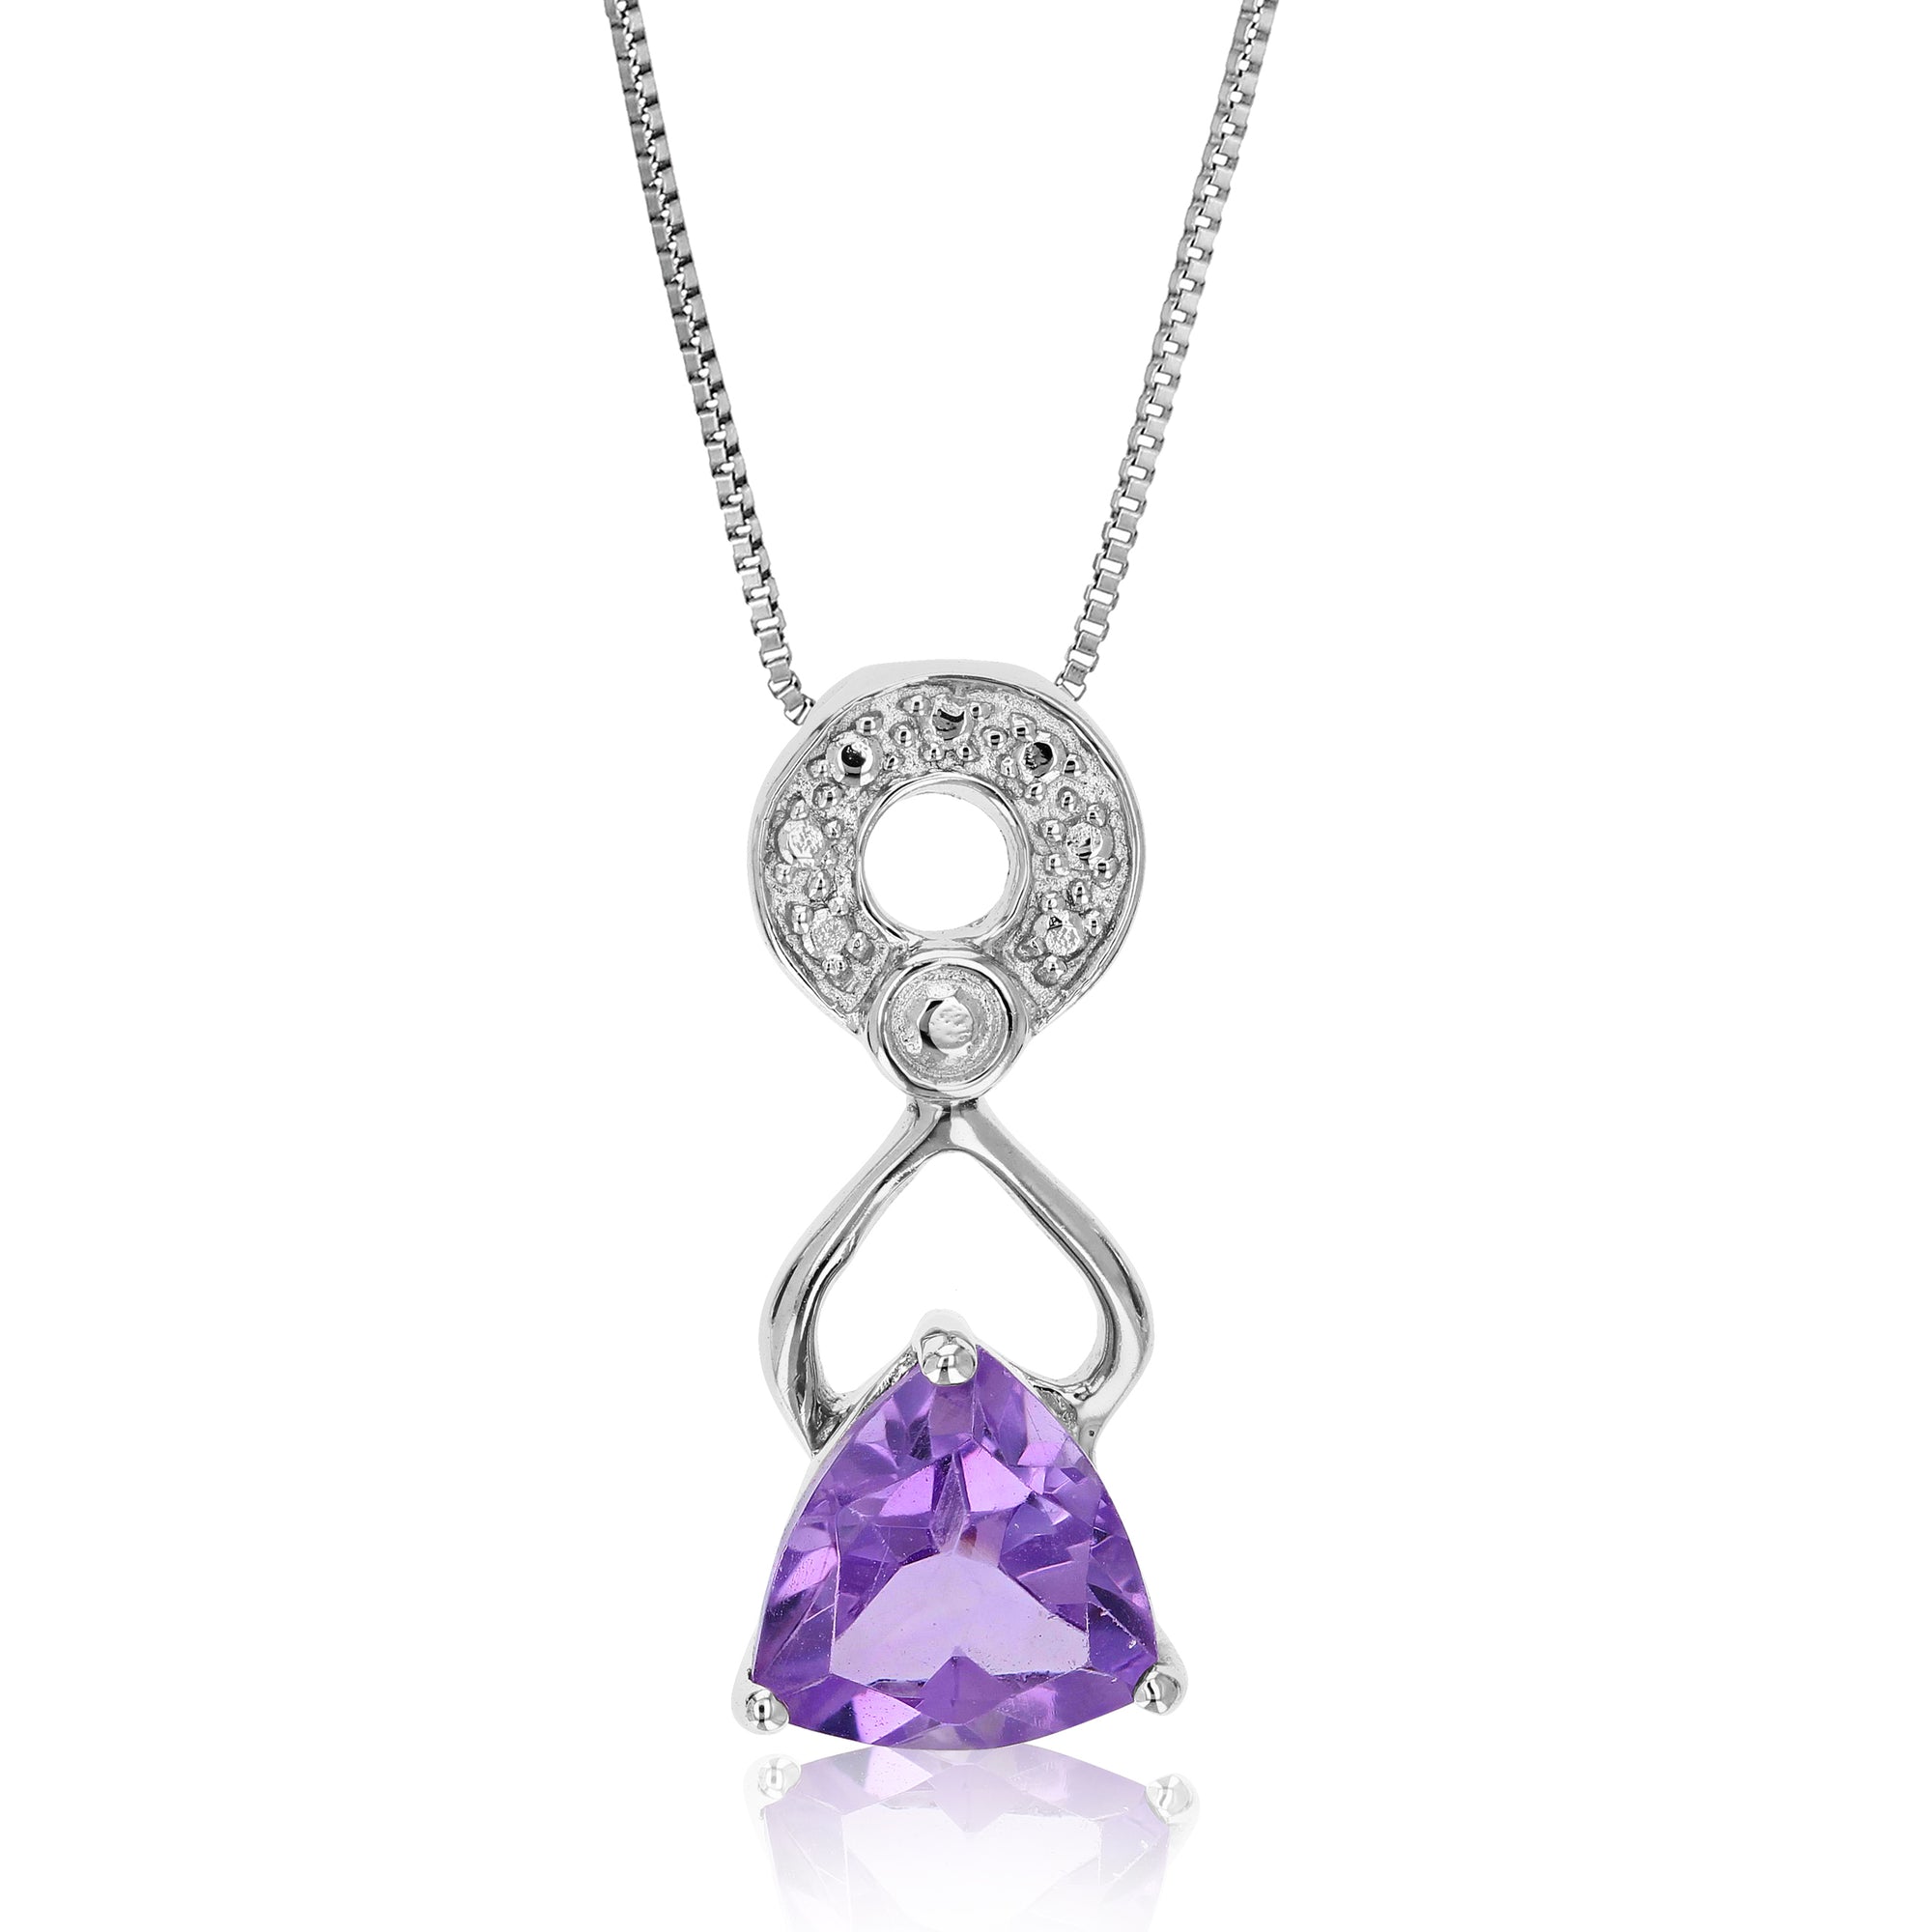 1 cttw Pendant Necklace, Purple Amethyst Trillion Shape Pendant Necklace for Women in .925 Sterling Silver with Rhodium, 18 Inch Chain, Prong Setting